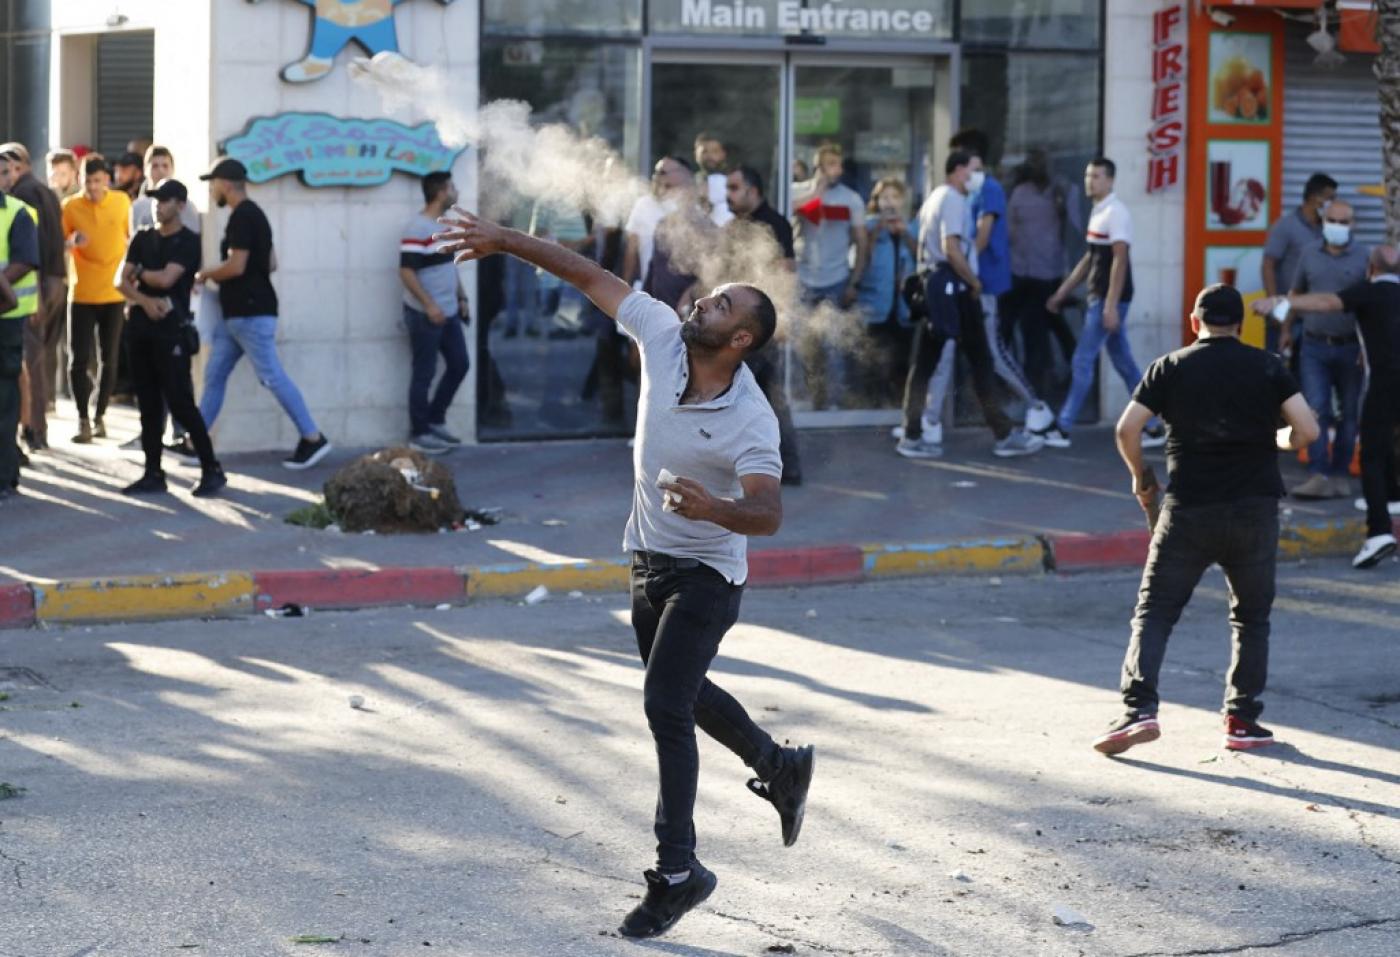 Palestinian Authority asks to buy munitions from "Israel" to disperse protesters: Report